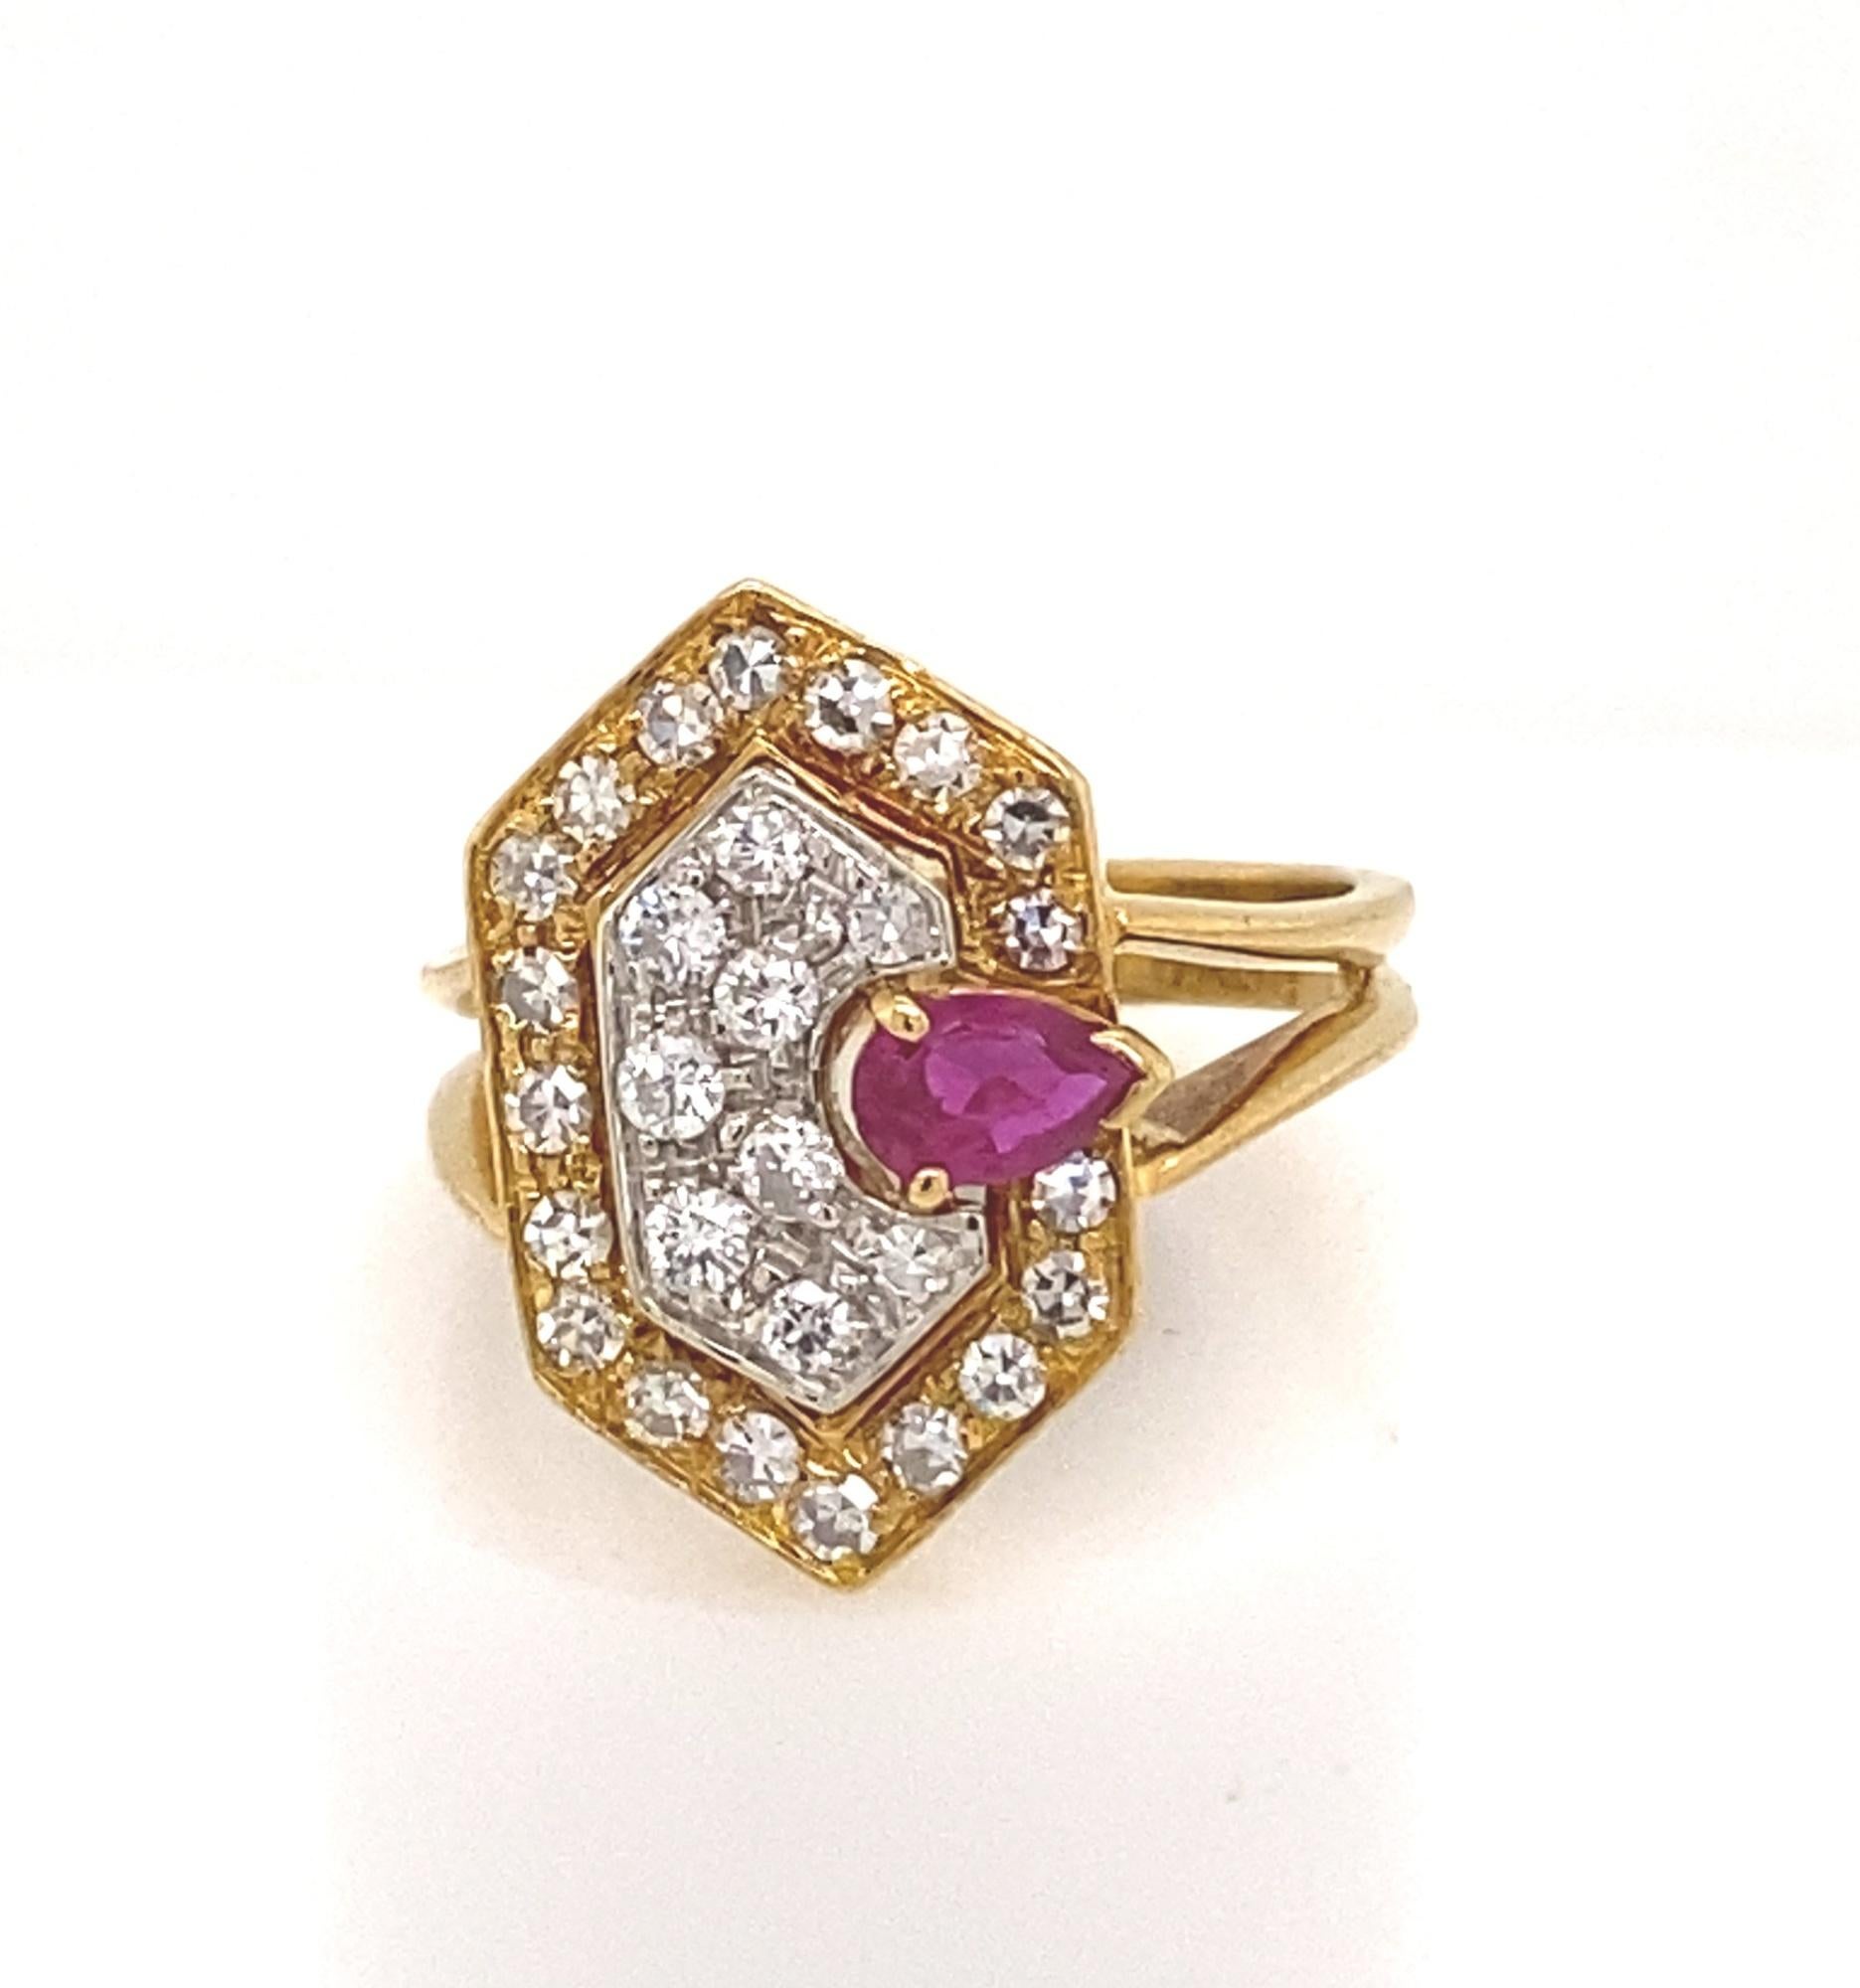 Faraone Mennella 18K Gold Ruby & Diamond Cocktail Ring In Good Condition For Sale In Woodland Hills, CA